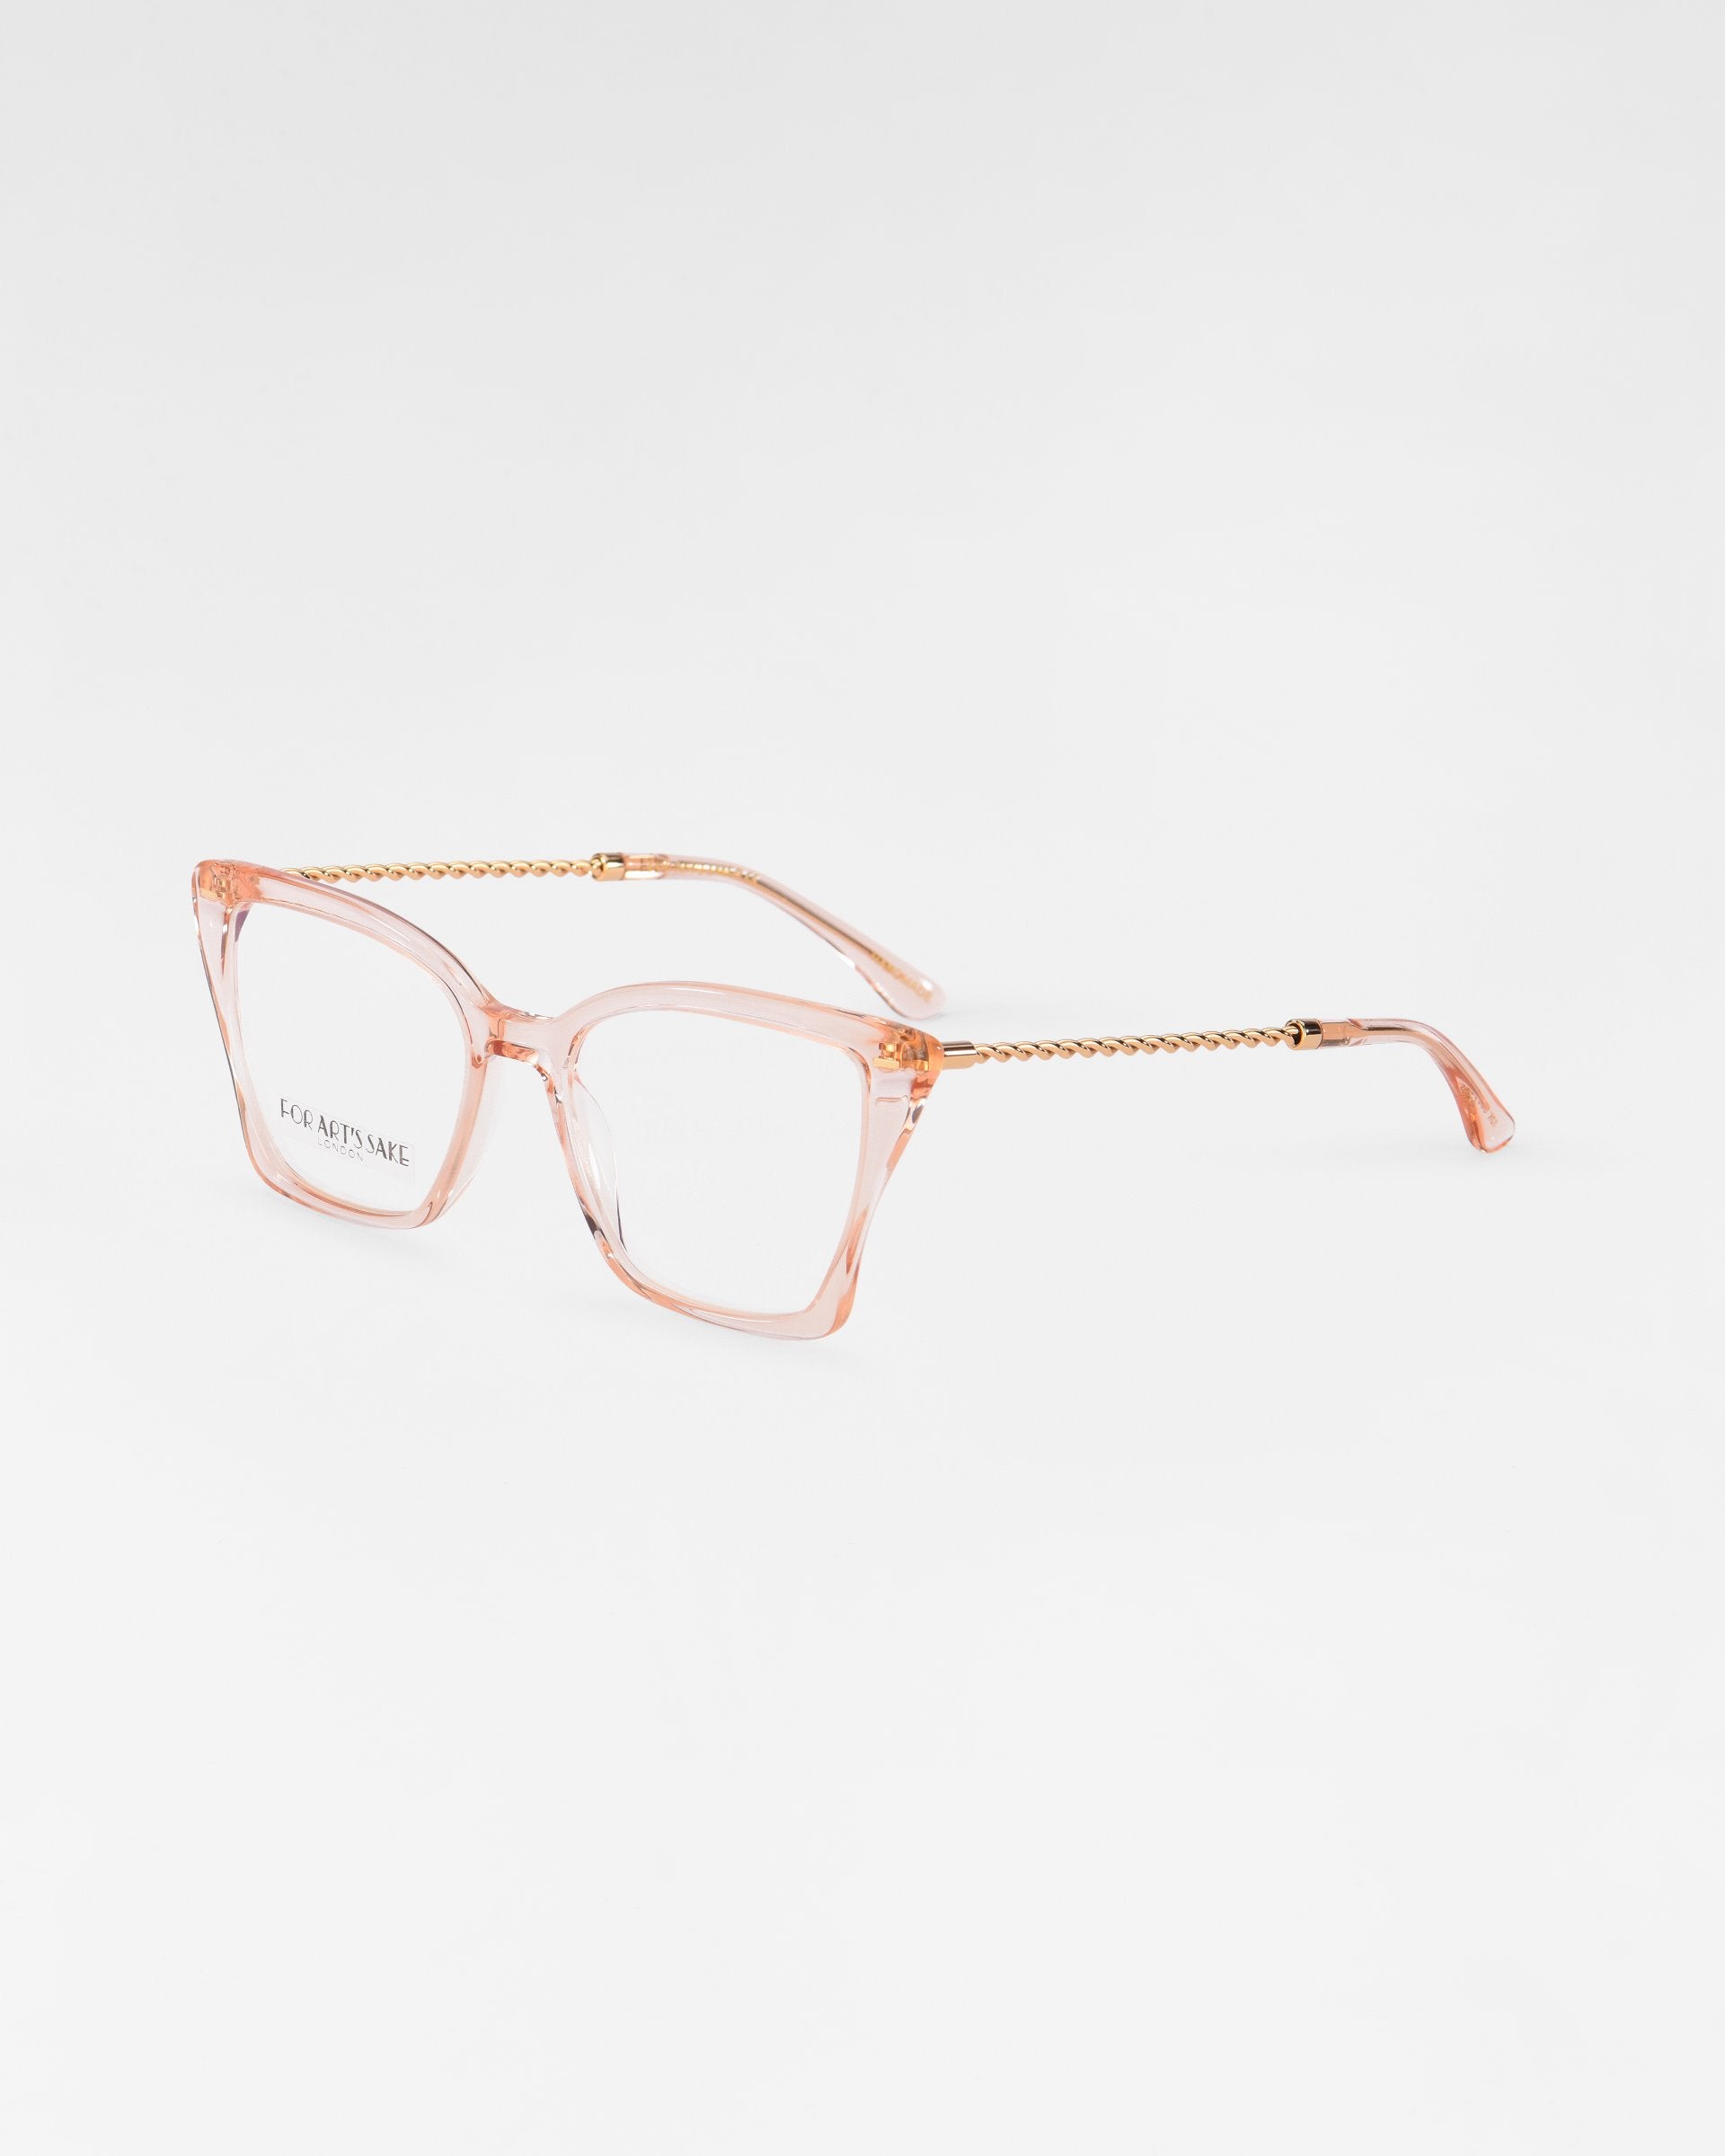 A pair of Dion eyeglasses from For Art&#39;s Sake® with pink-tinted, transparent rectangular frames and thin, twisted metallic gold temples. The left lens has the text &quot;KOMAROV&quot; printed in gold. These chic glasses also feature UV protection lenses. The background is white.